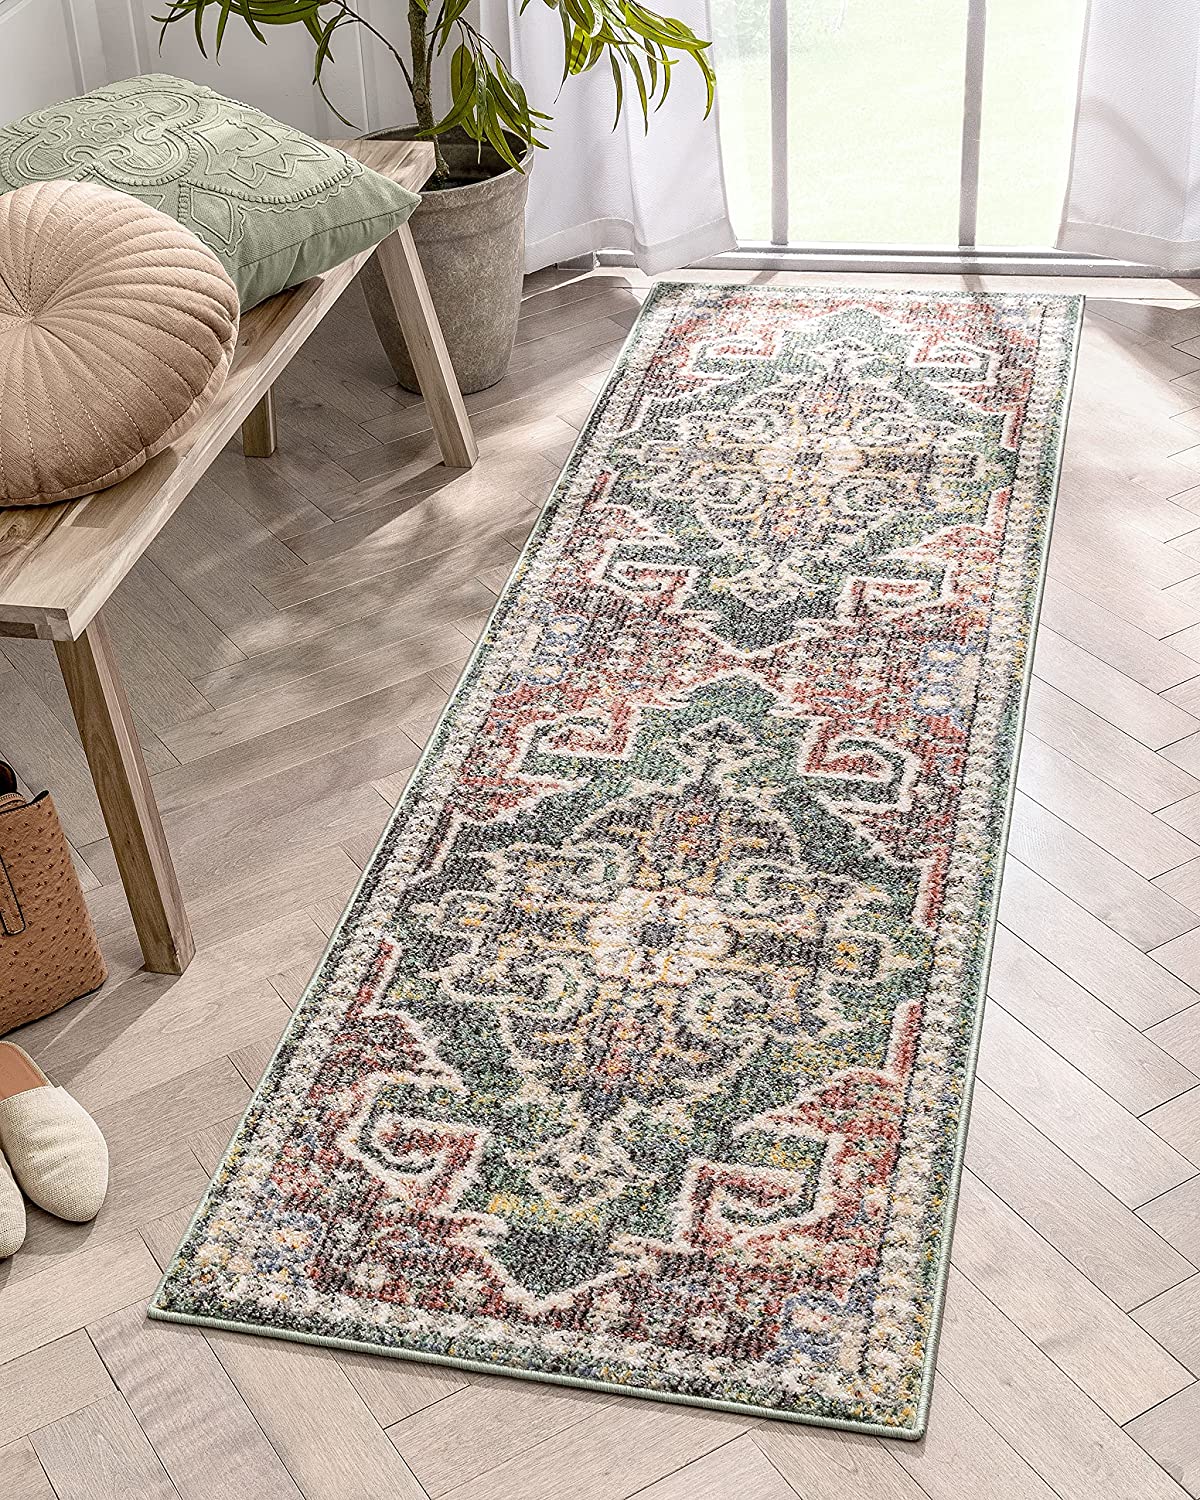 Well Woven Leon Vintage Medallion Green & Rust Red Pastel Colors Runner Rug